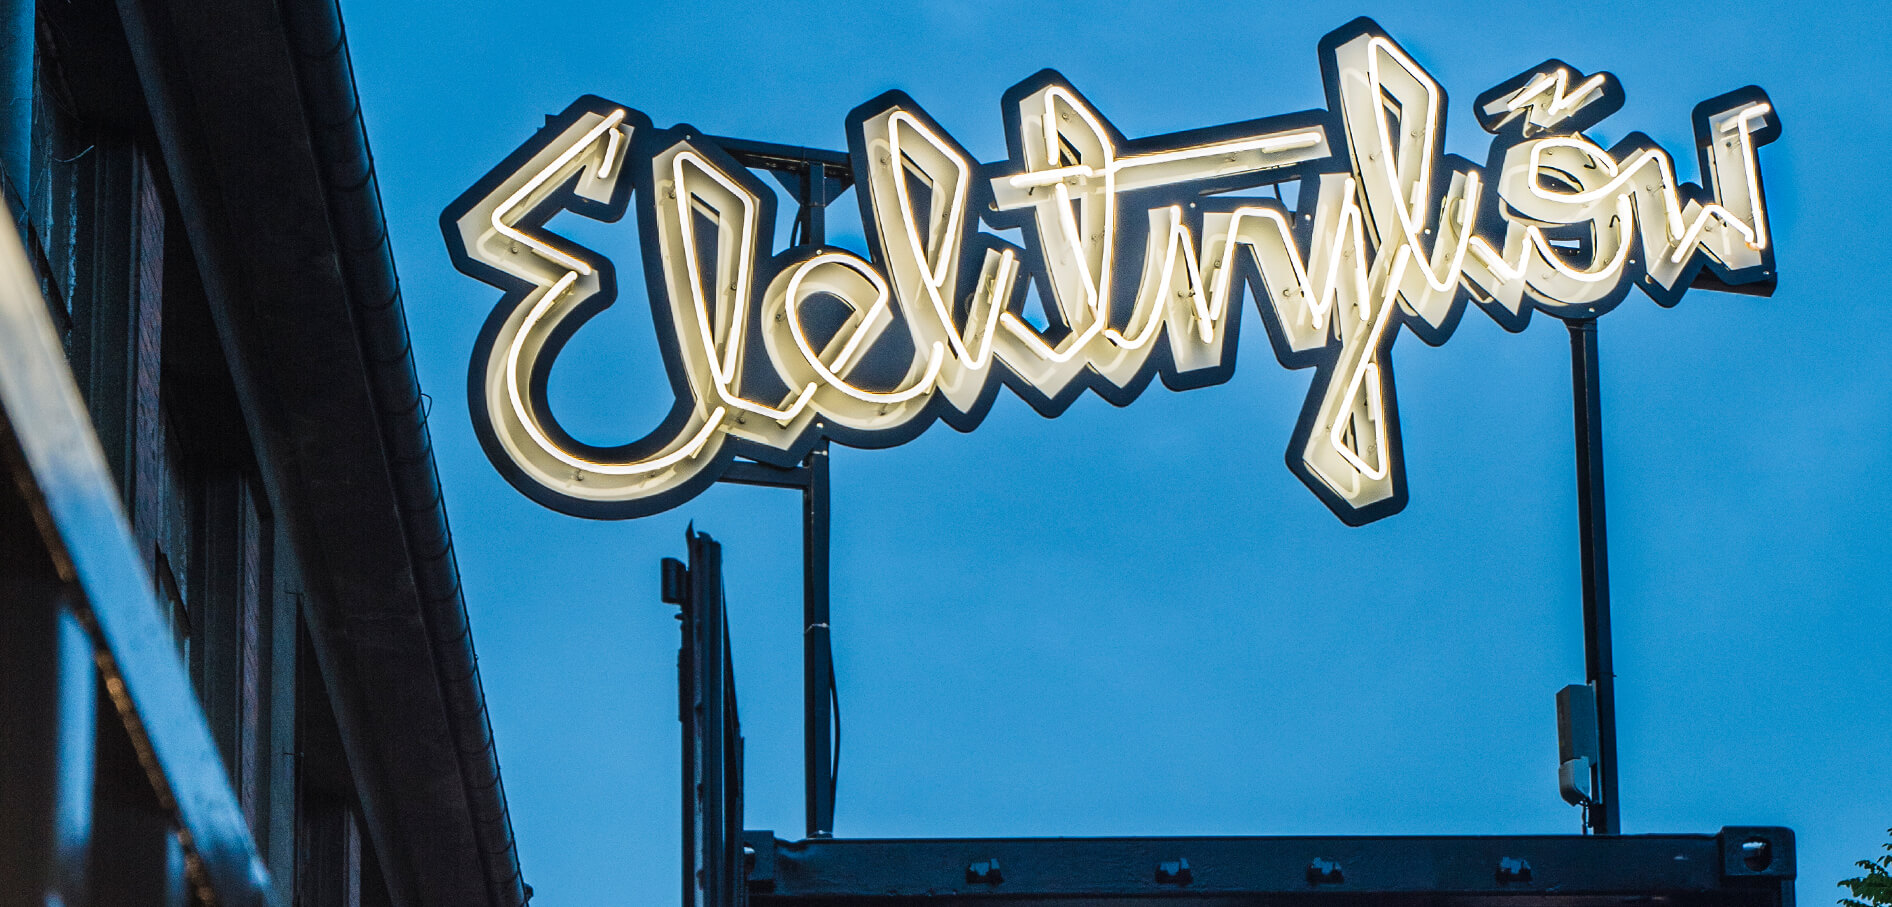 Electrical - neon-electricity-street-neon-on-a-steel-at-height-neon-sub-lighted-neon-on-a-container-neon-above-glow-neon-in-a-pub-letter-neonowe-logo-sign-gdansk